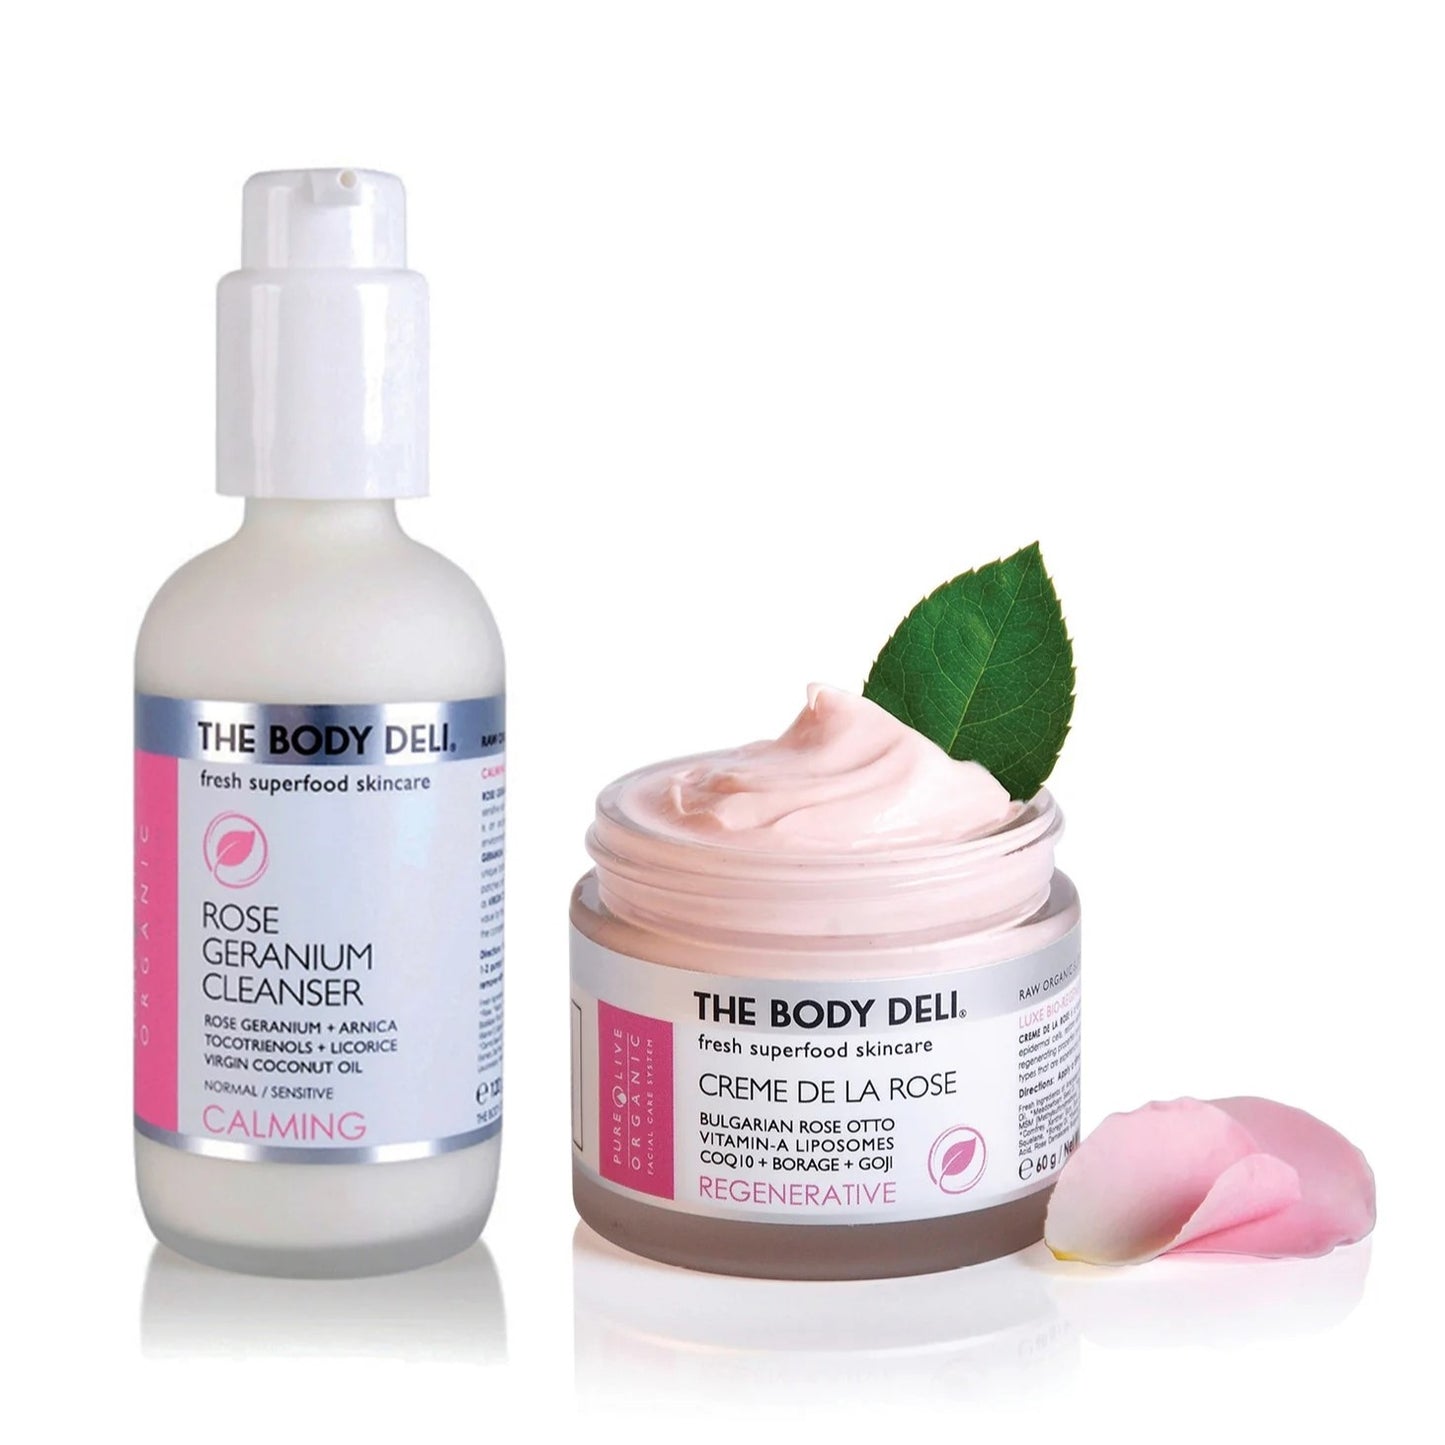 THE BODY DELI The Rose Collection